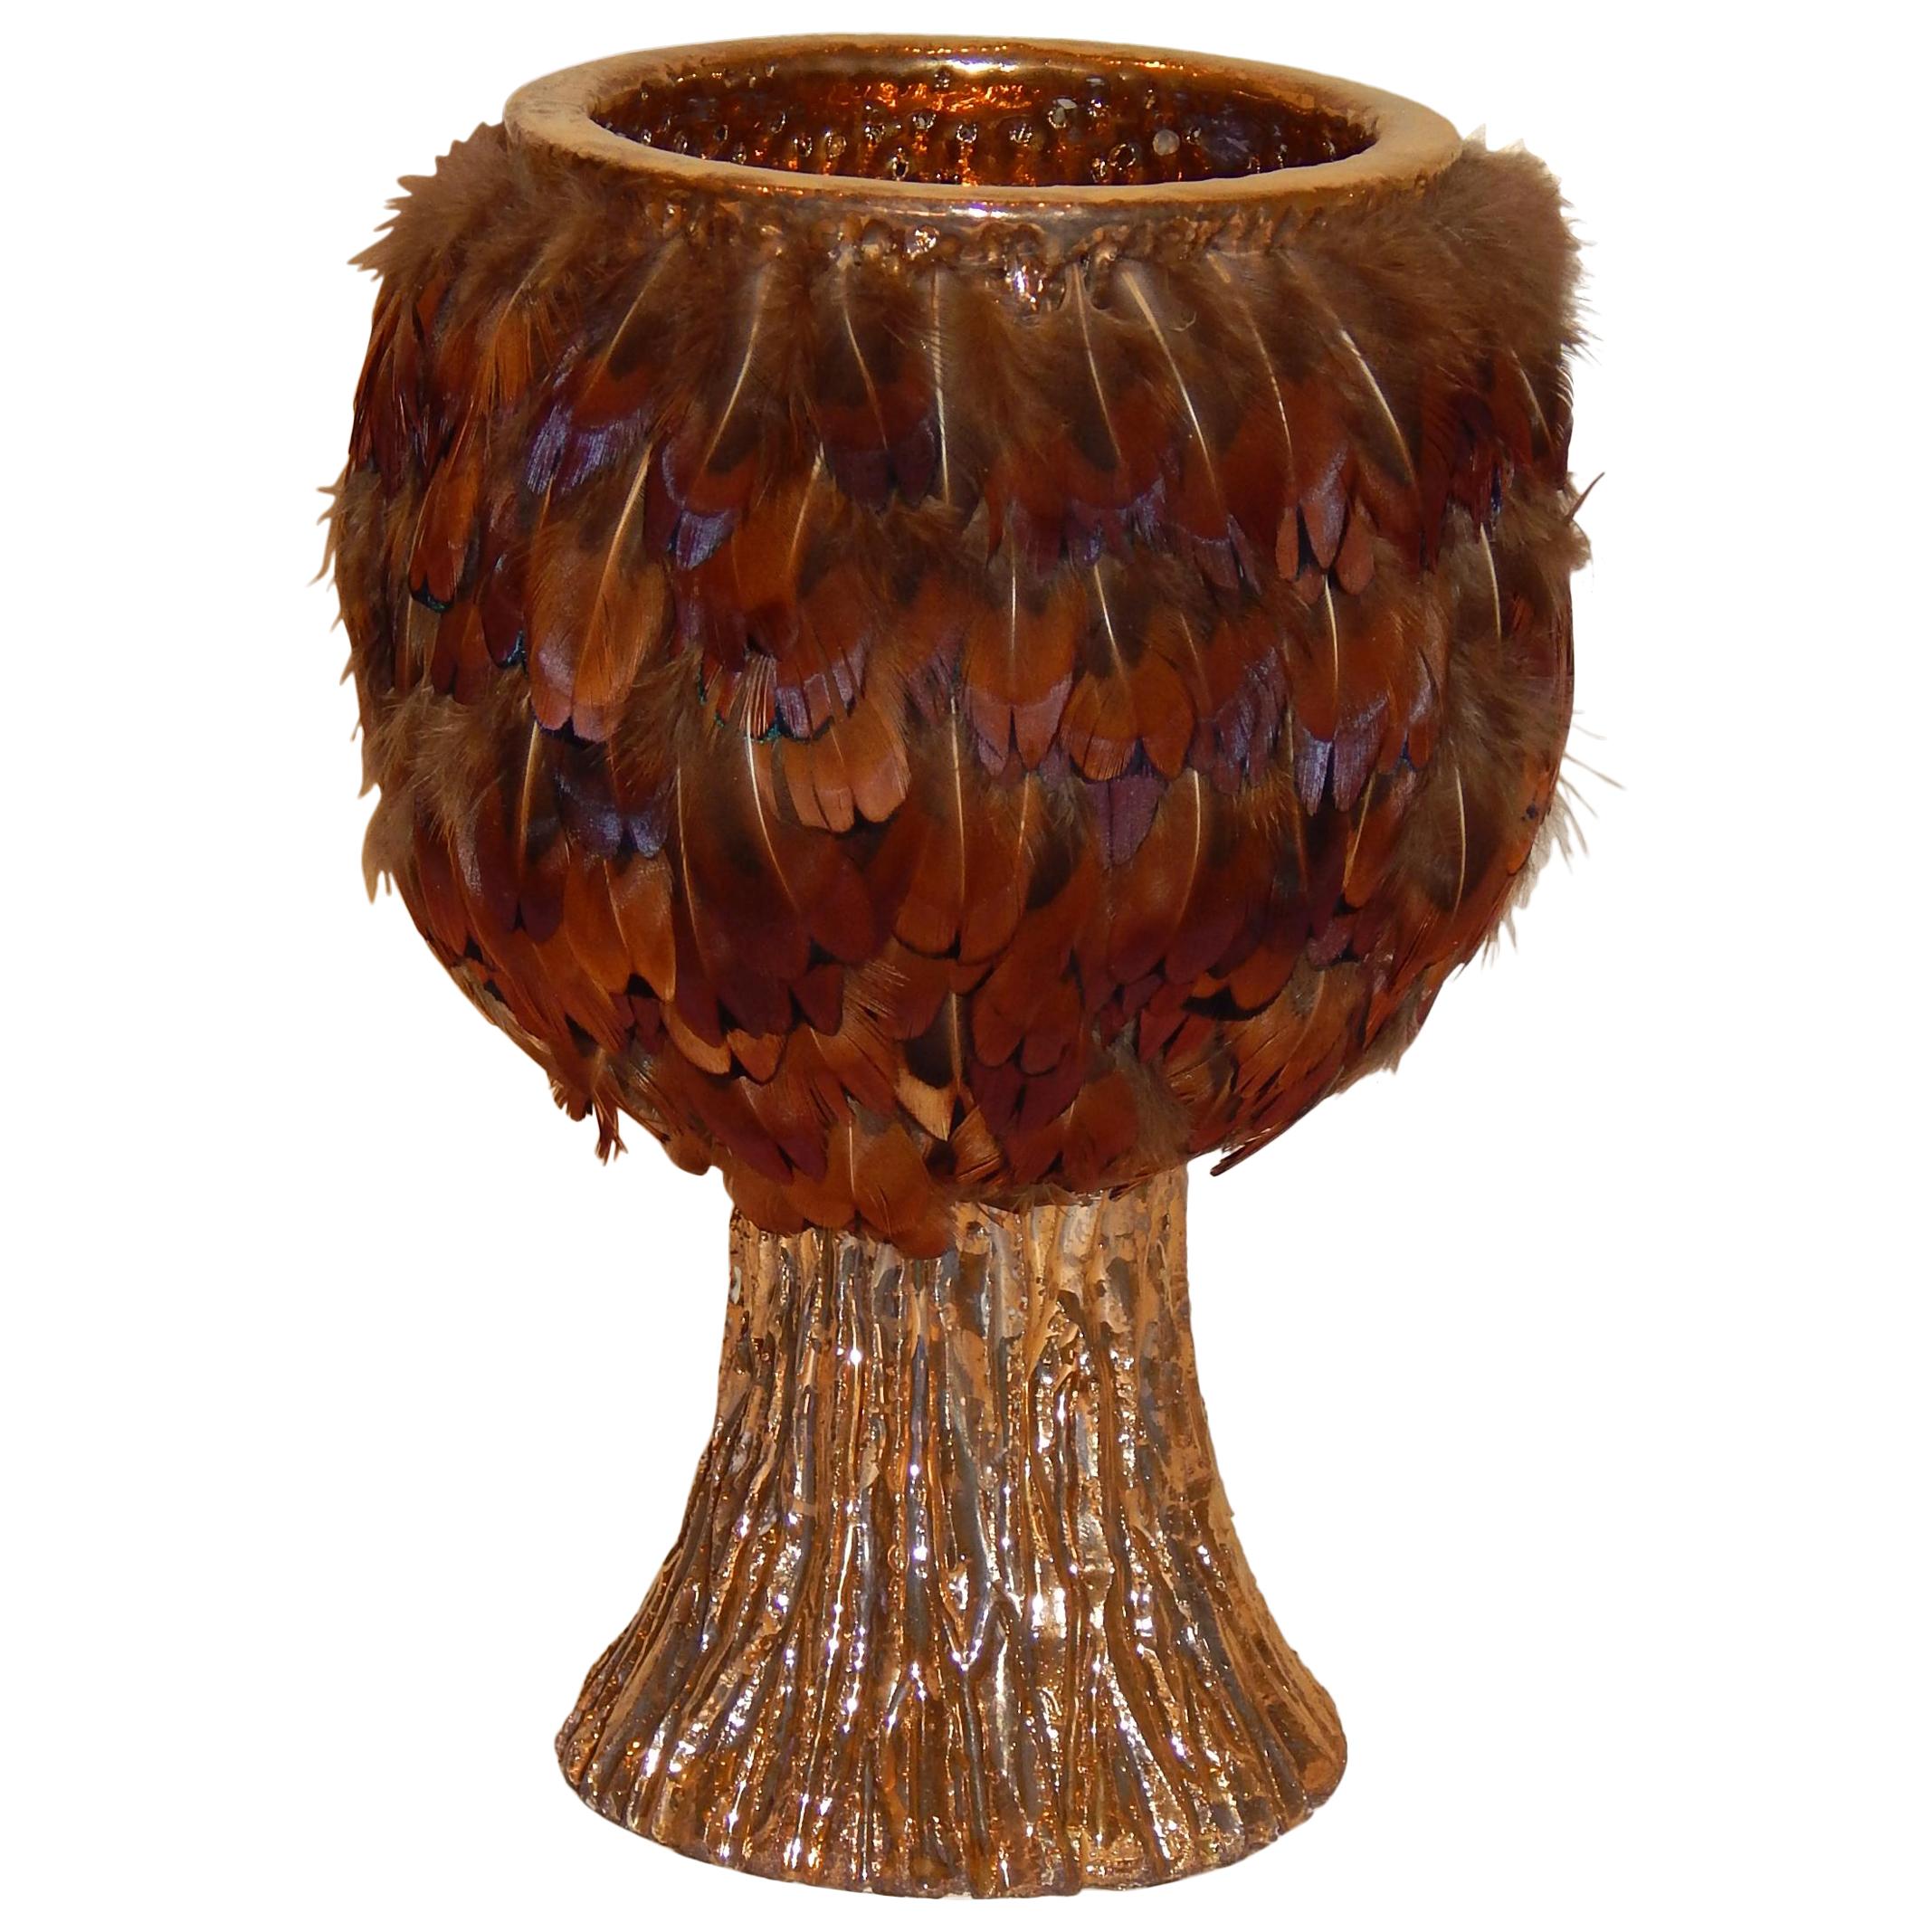 Ken Shores Art Pottery Chalice Form Fetish Pot with Applied Feathers For Sale